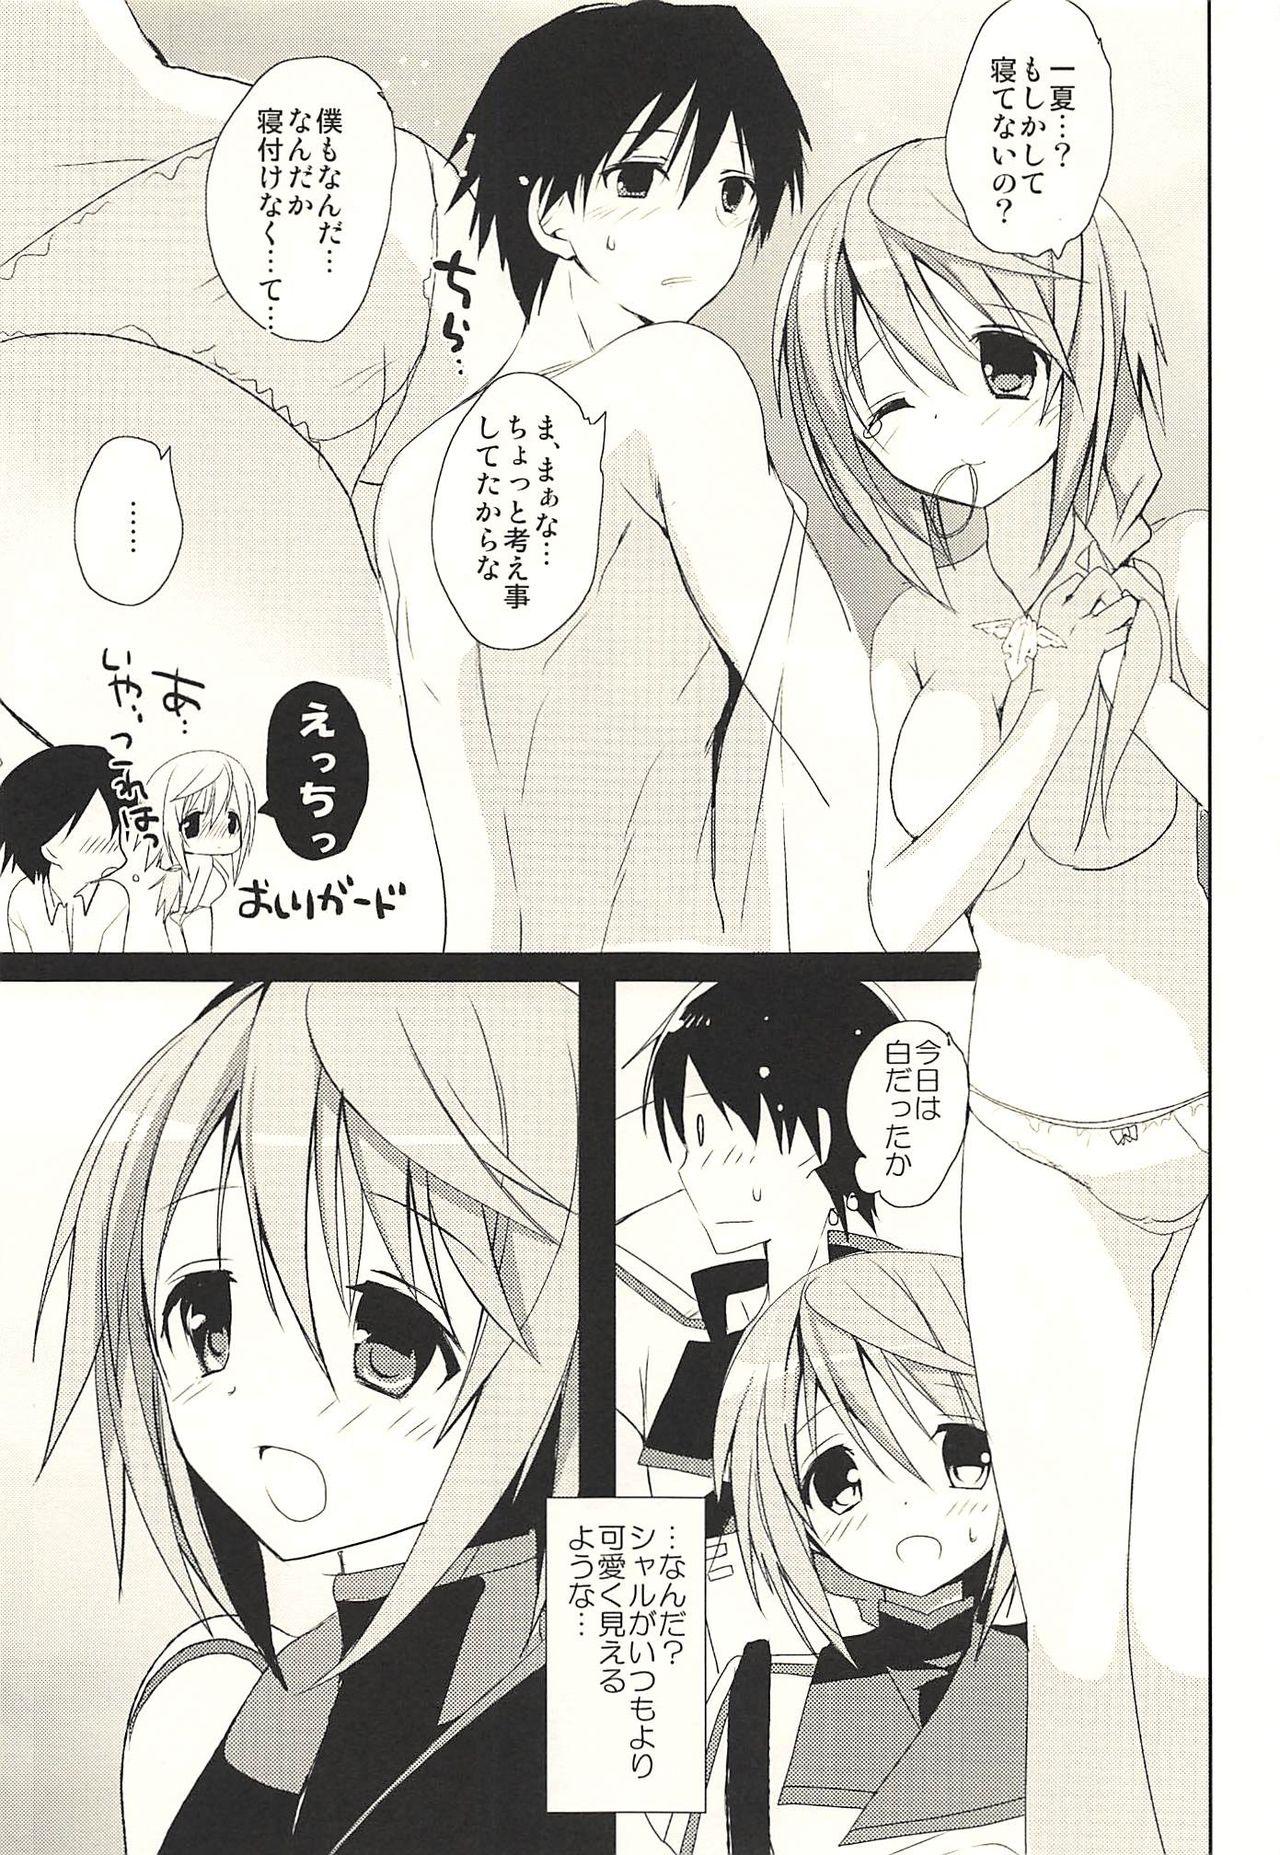 Lesbians Daisuki Collection - Infinite stratos Thylinh - Page 7